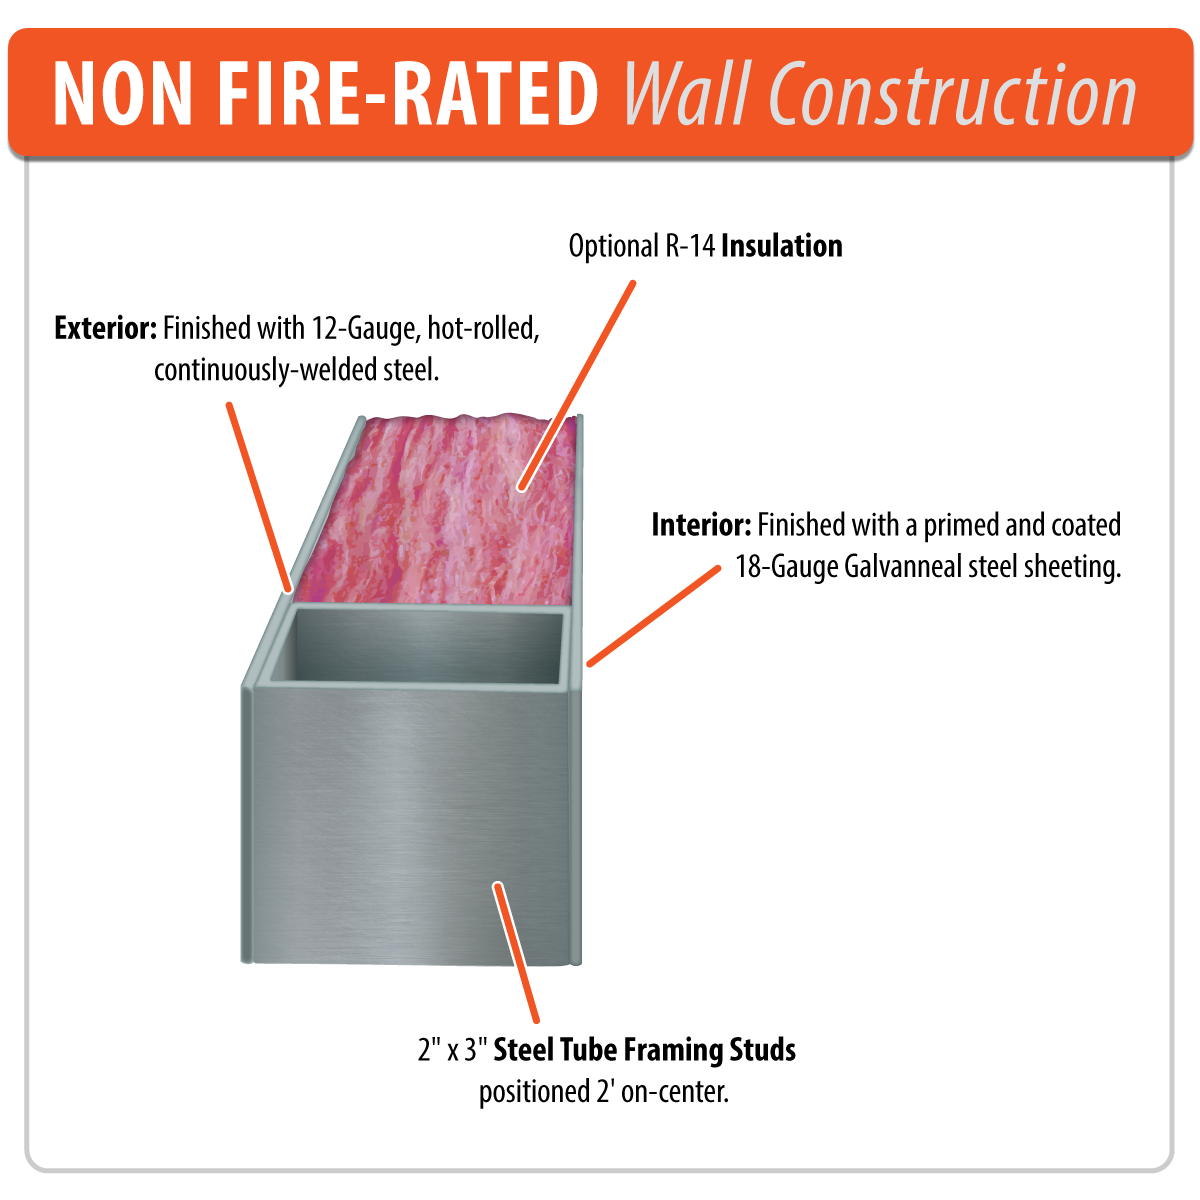 Non Fire-Rated Wall Construction Feature